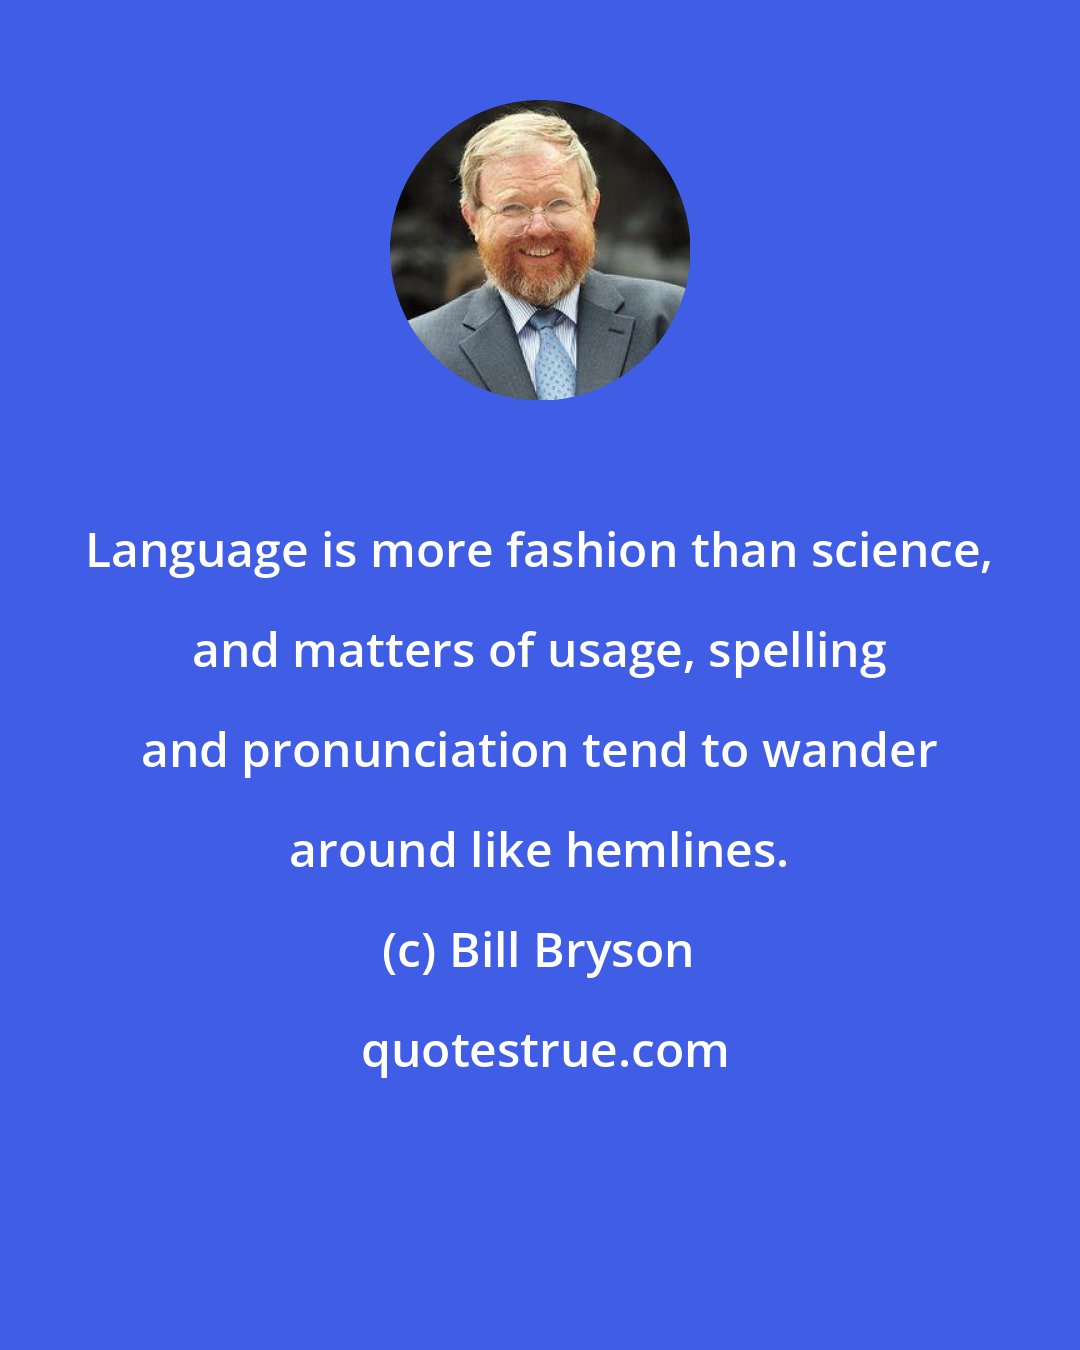 Bill Bryson: Language is more fashion than science, and matters of usage, spelling and pronunciation tend to wander around like hemlines.